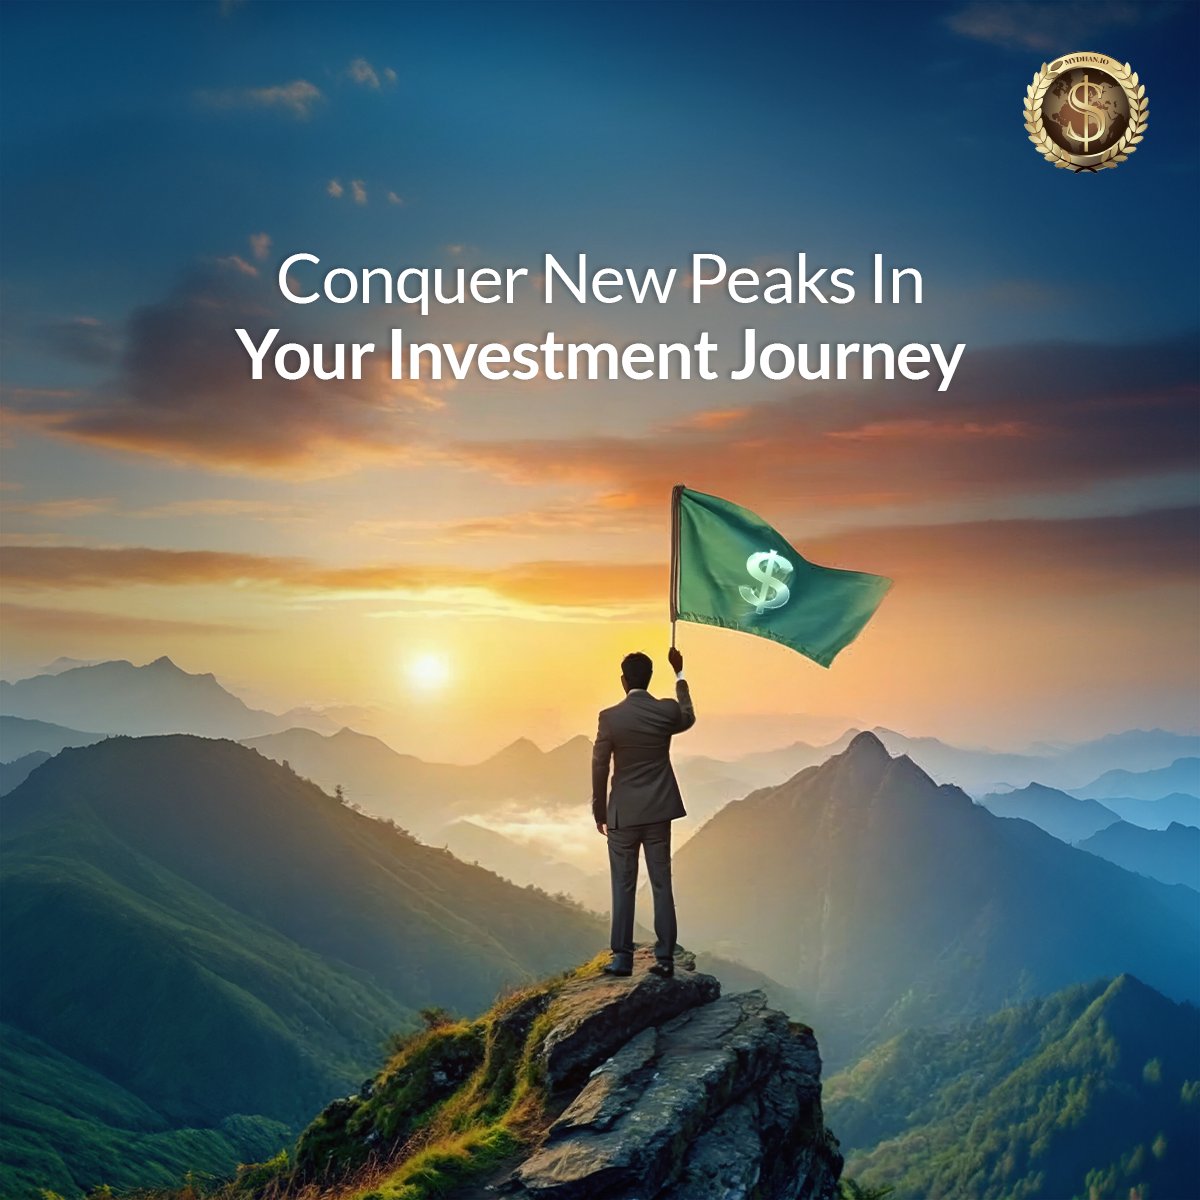 Climb the heights of financial success and reach new peaks in your investment journey. 

#myDhan #FinancialTransformation #NewInvestments